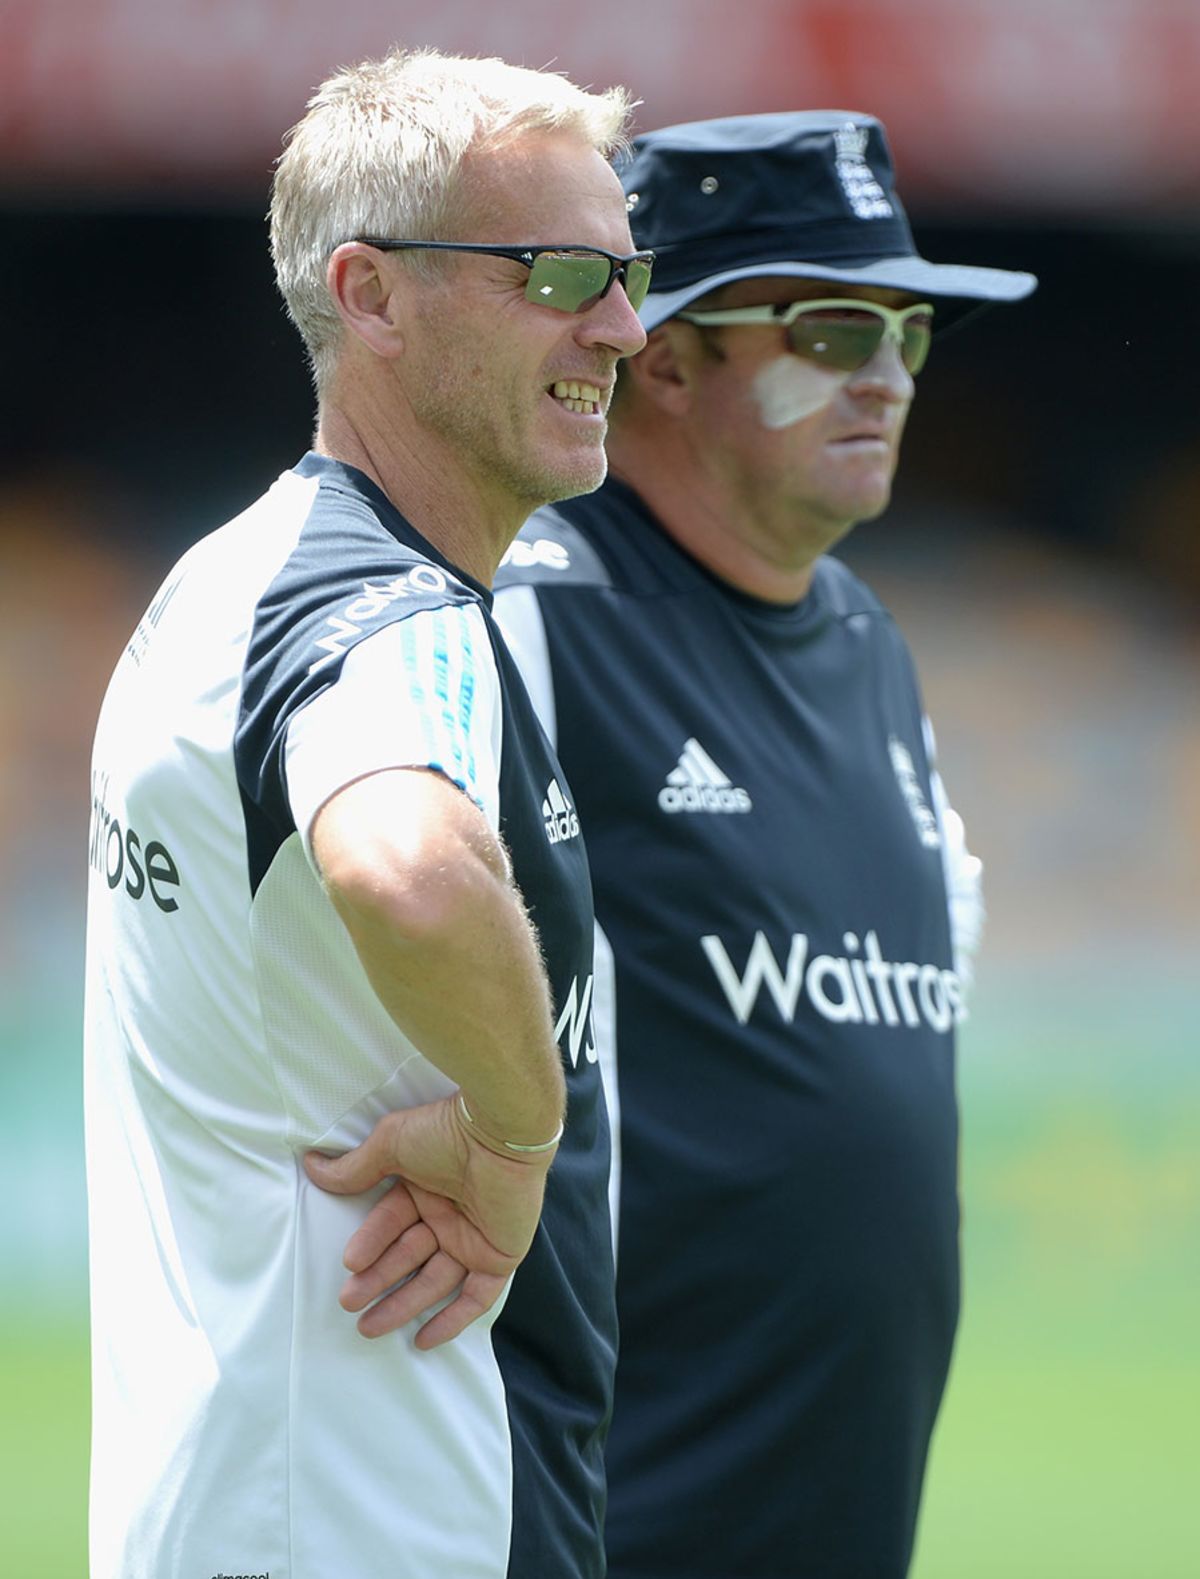 England's coaching duo, Peter Moores and Paul Farbrace, Brisbane, January 19, 2015